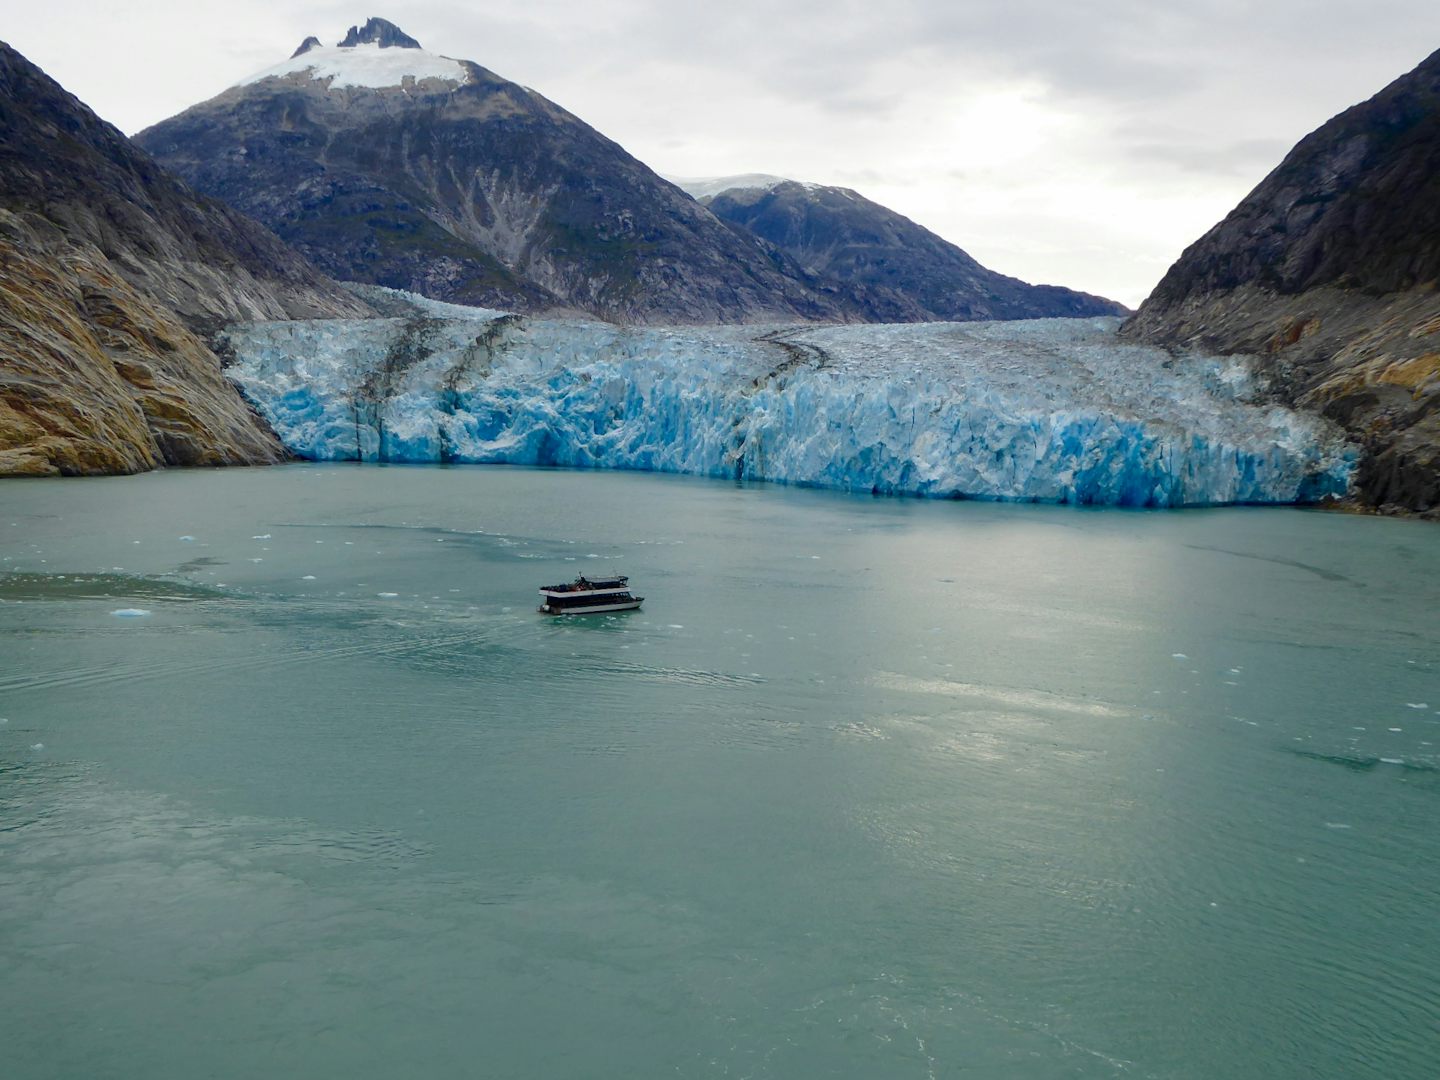 Dawes Glacier, a small boat went right up close (not from our ship)